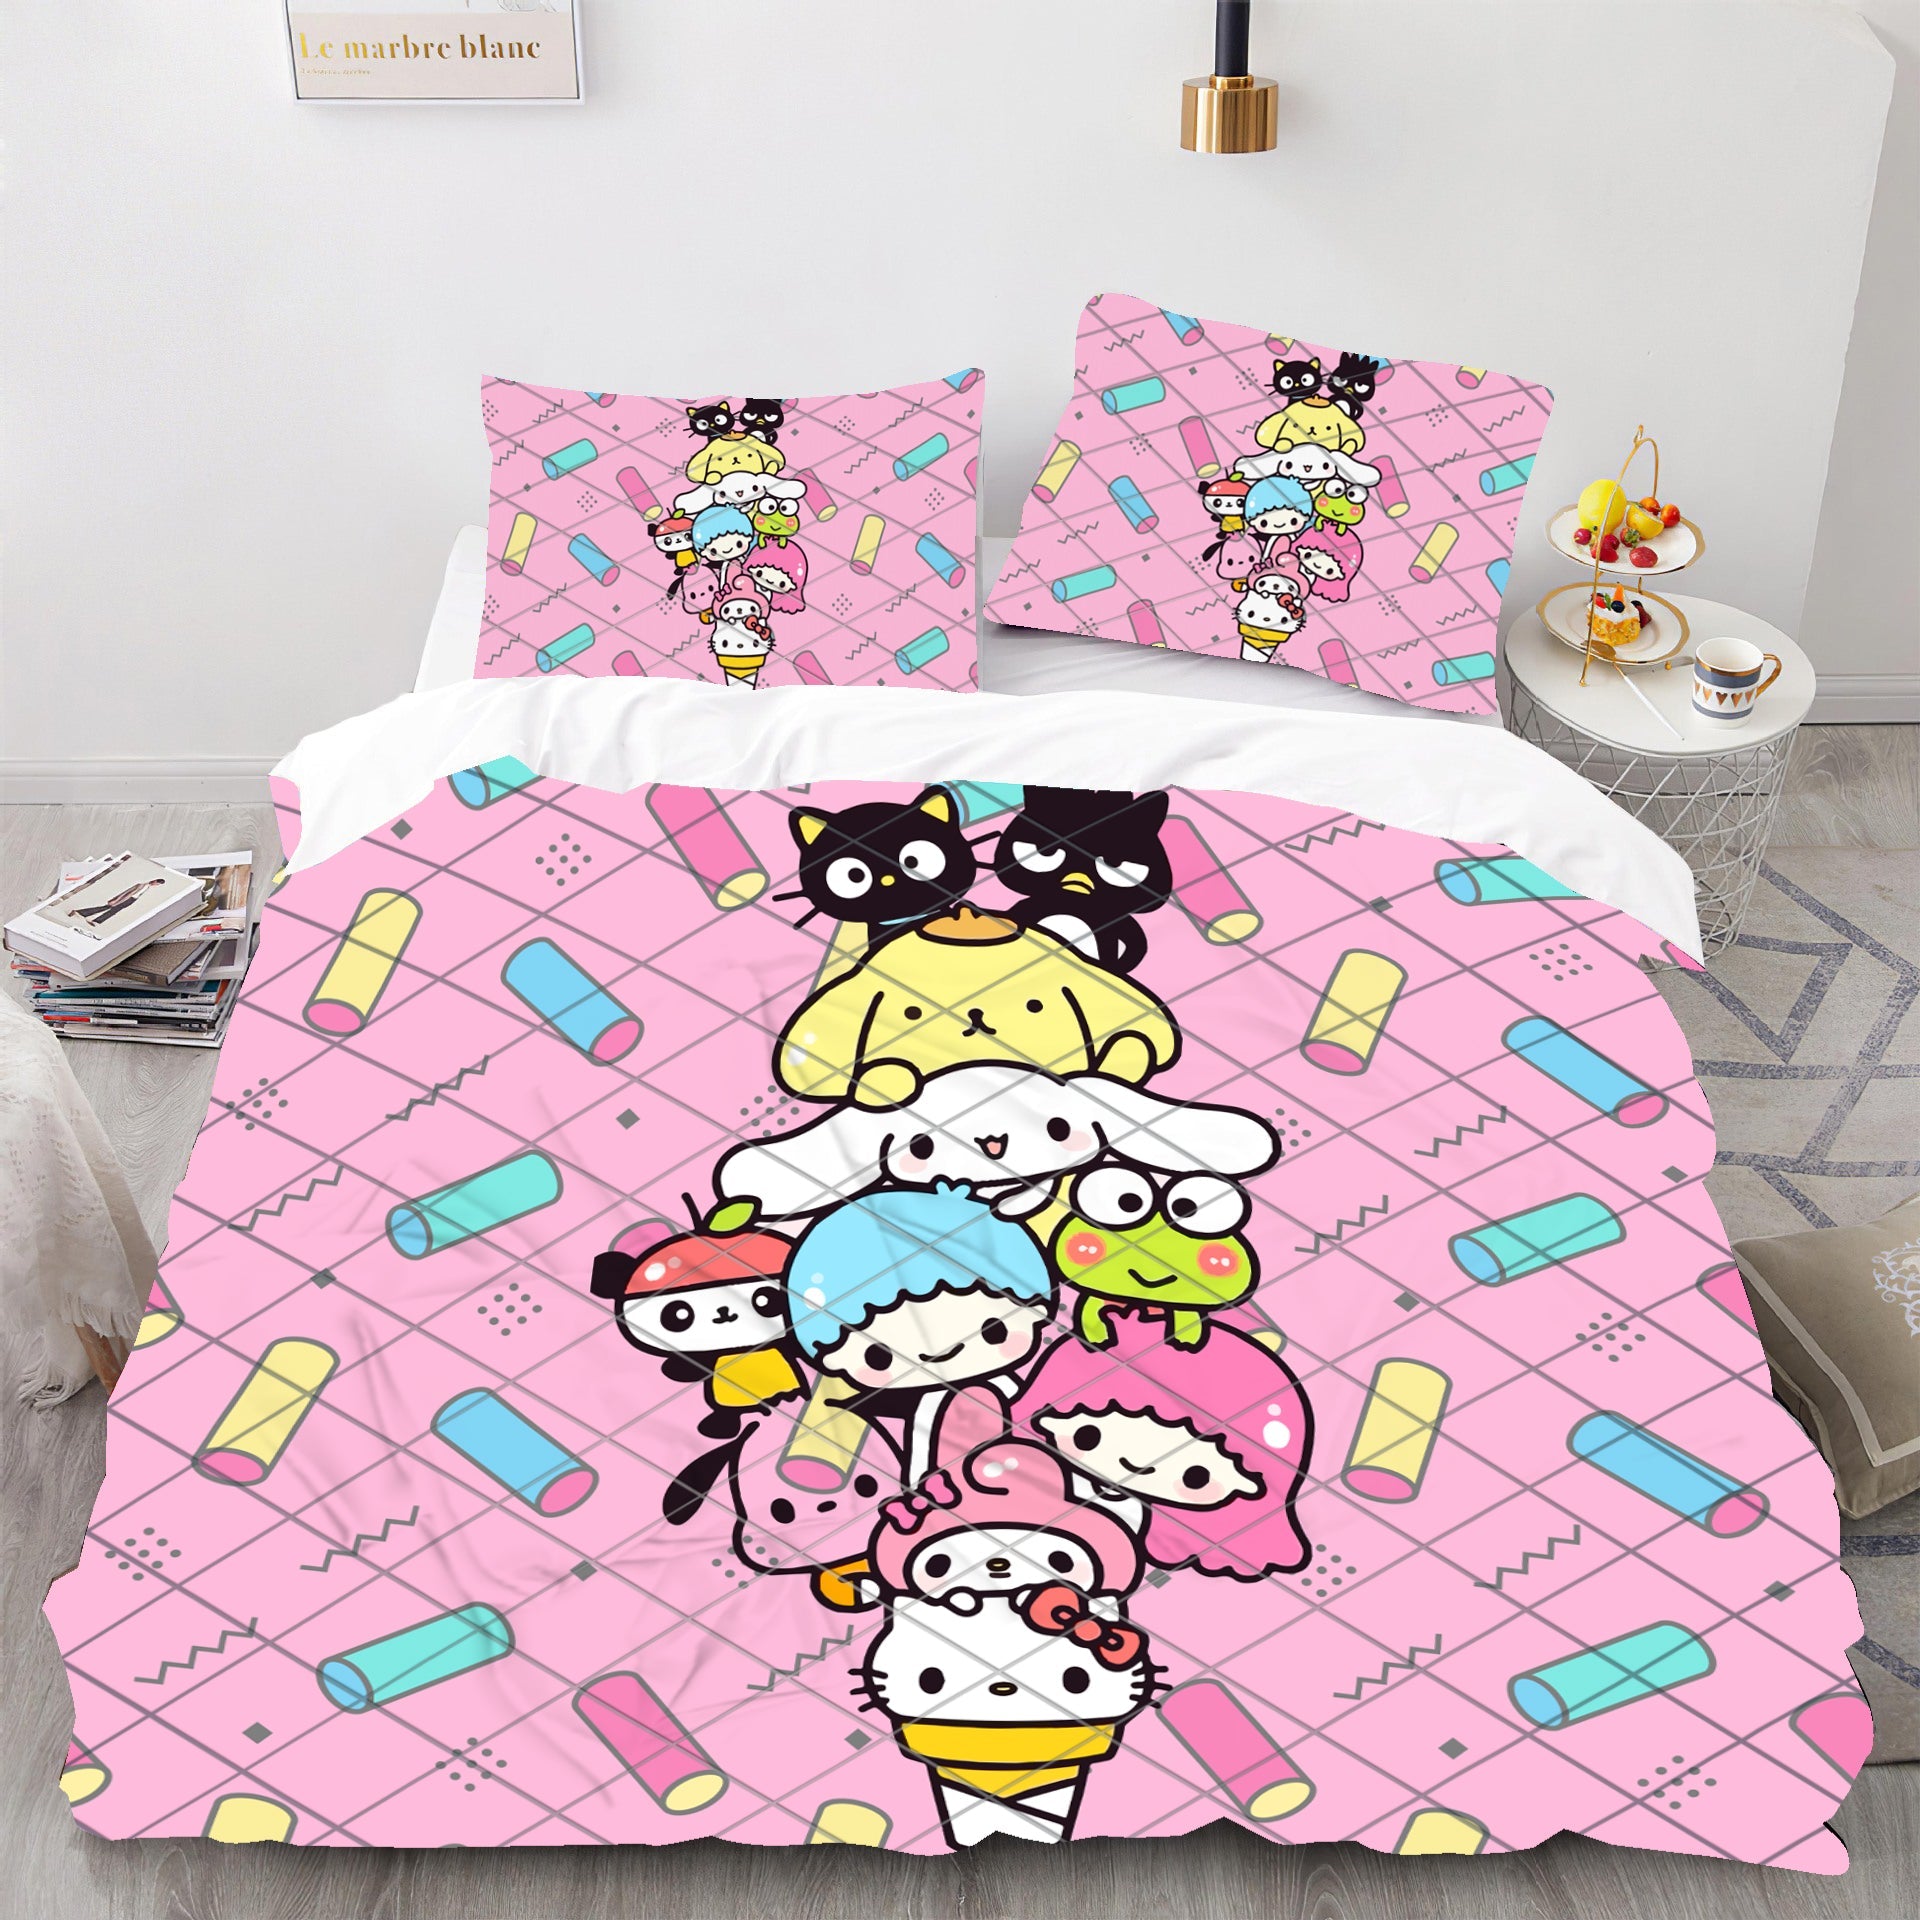 Hello Kitty Sanrio Blanket Quilt Tapestry 36.5”x31” Cute Flowers Bees Birds  Bugs